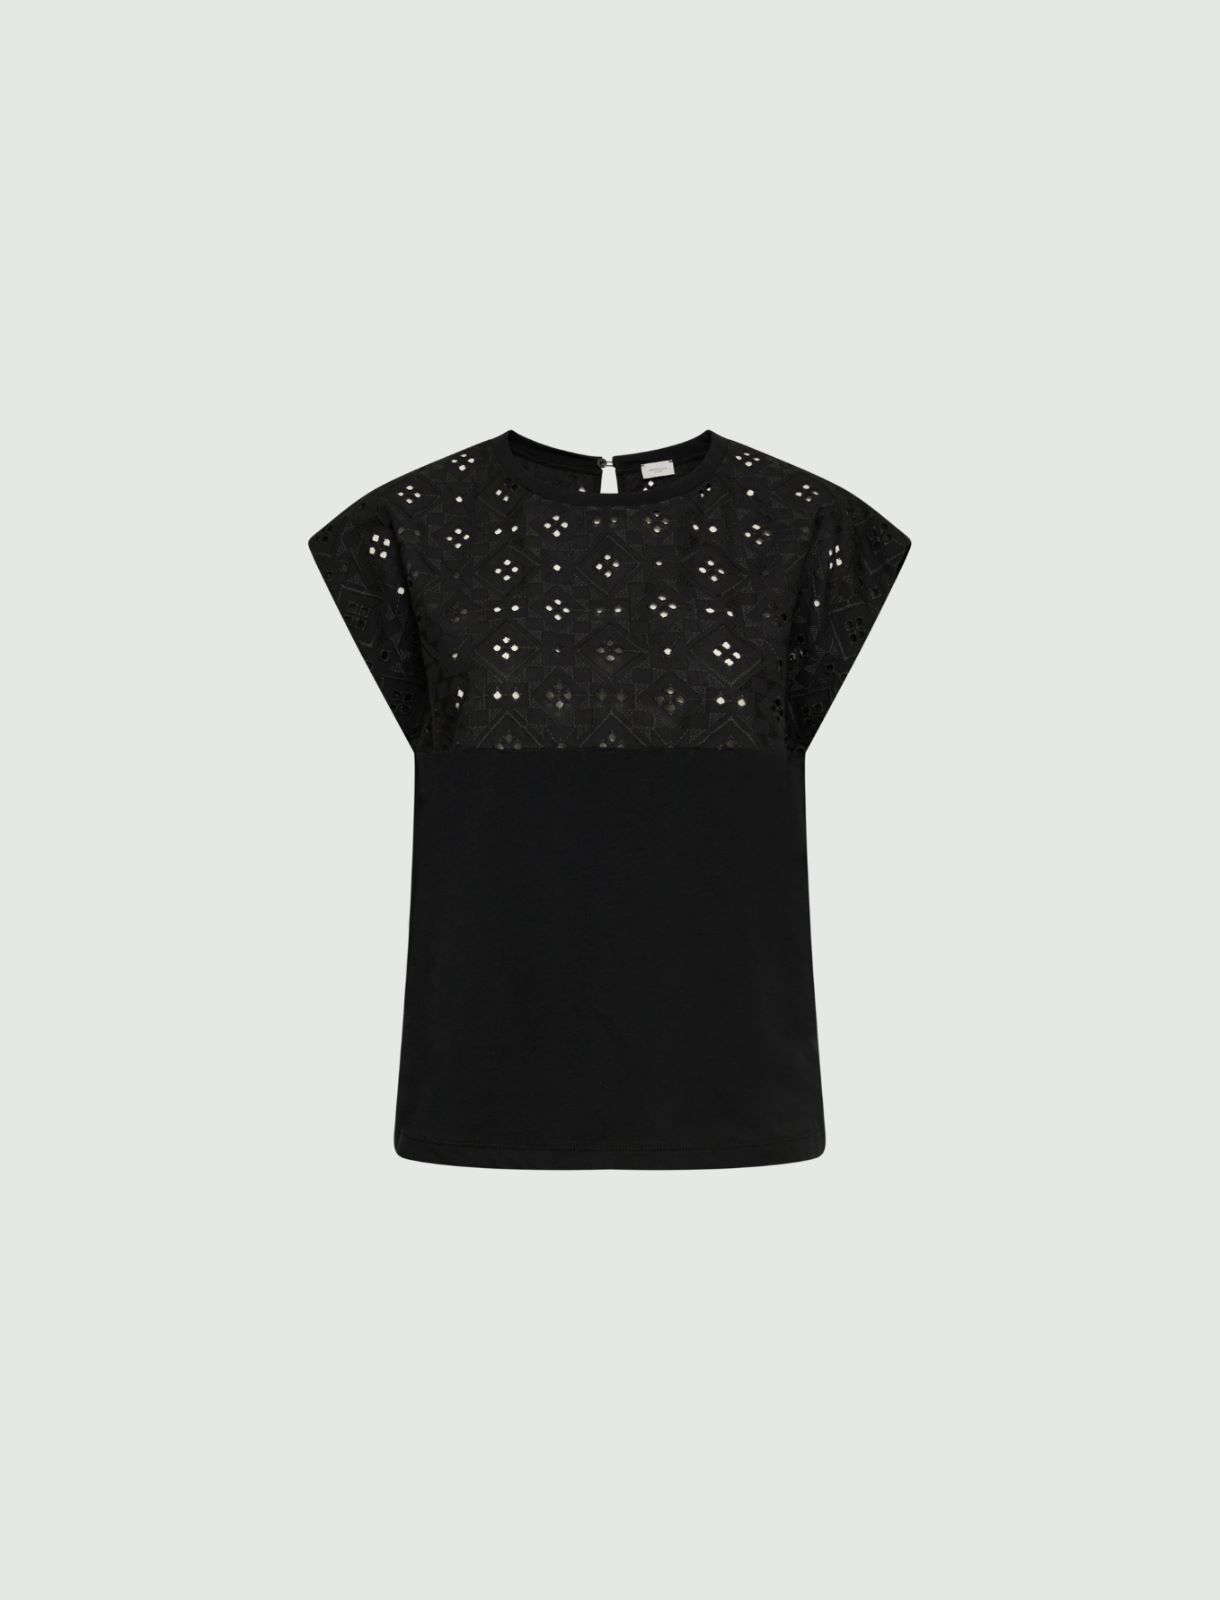 Broderie anglaise T-shirt - Black - Marella